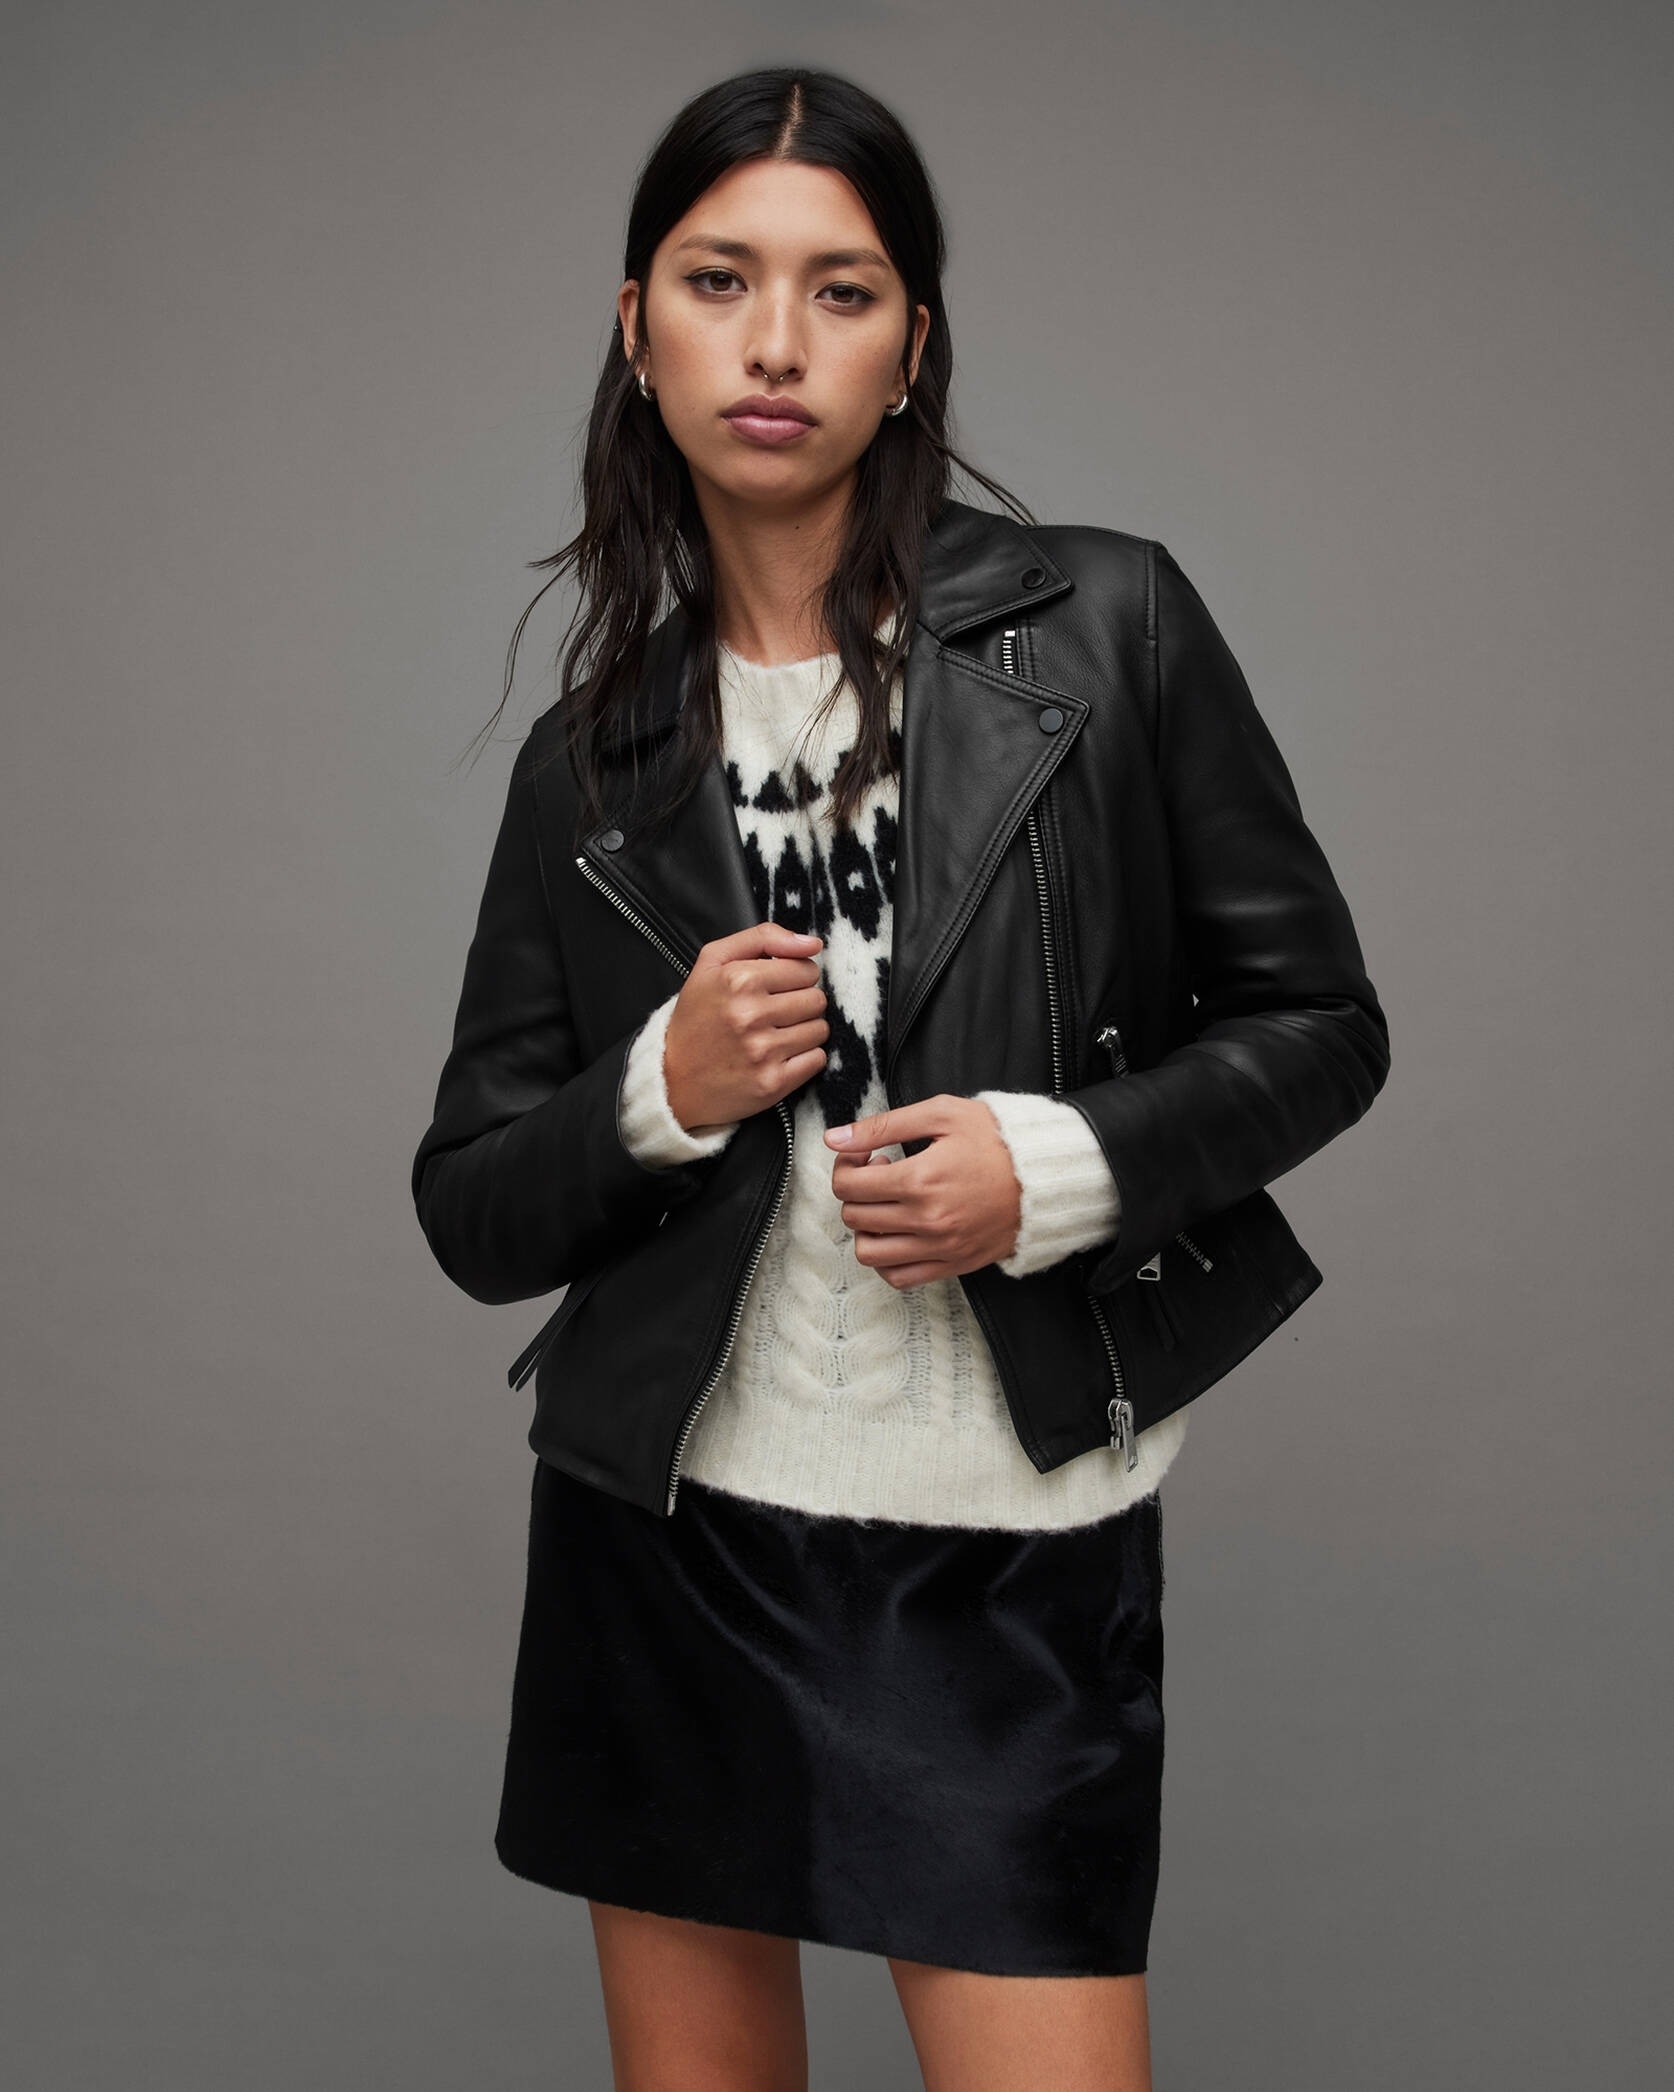 model posing in the leather jacket